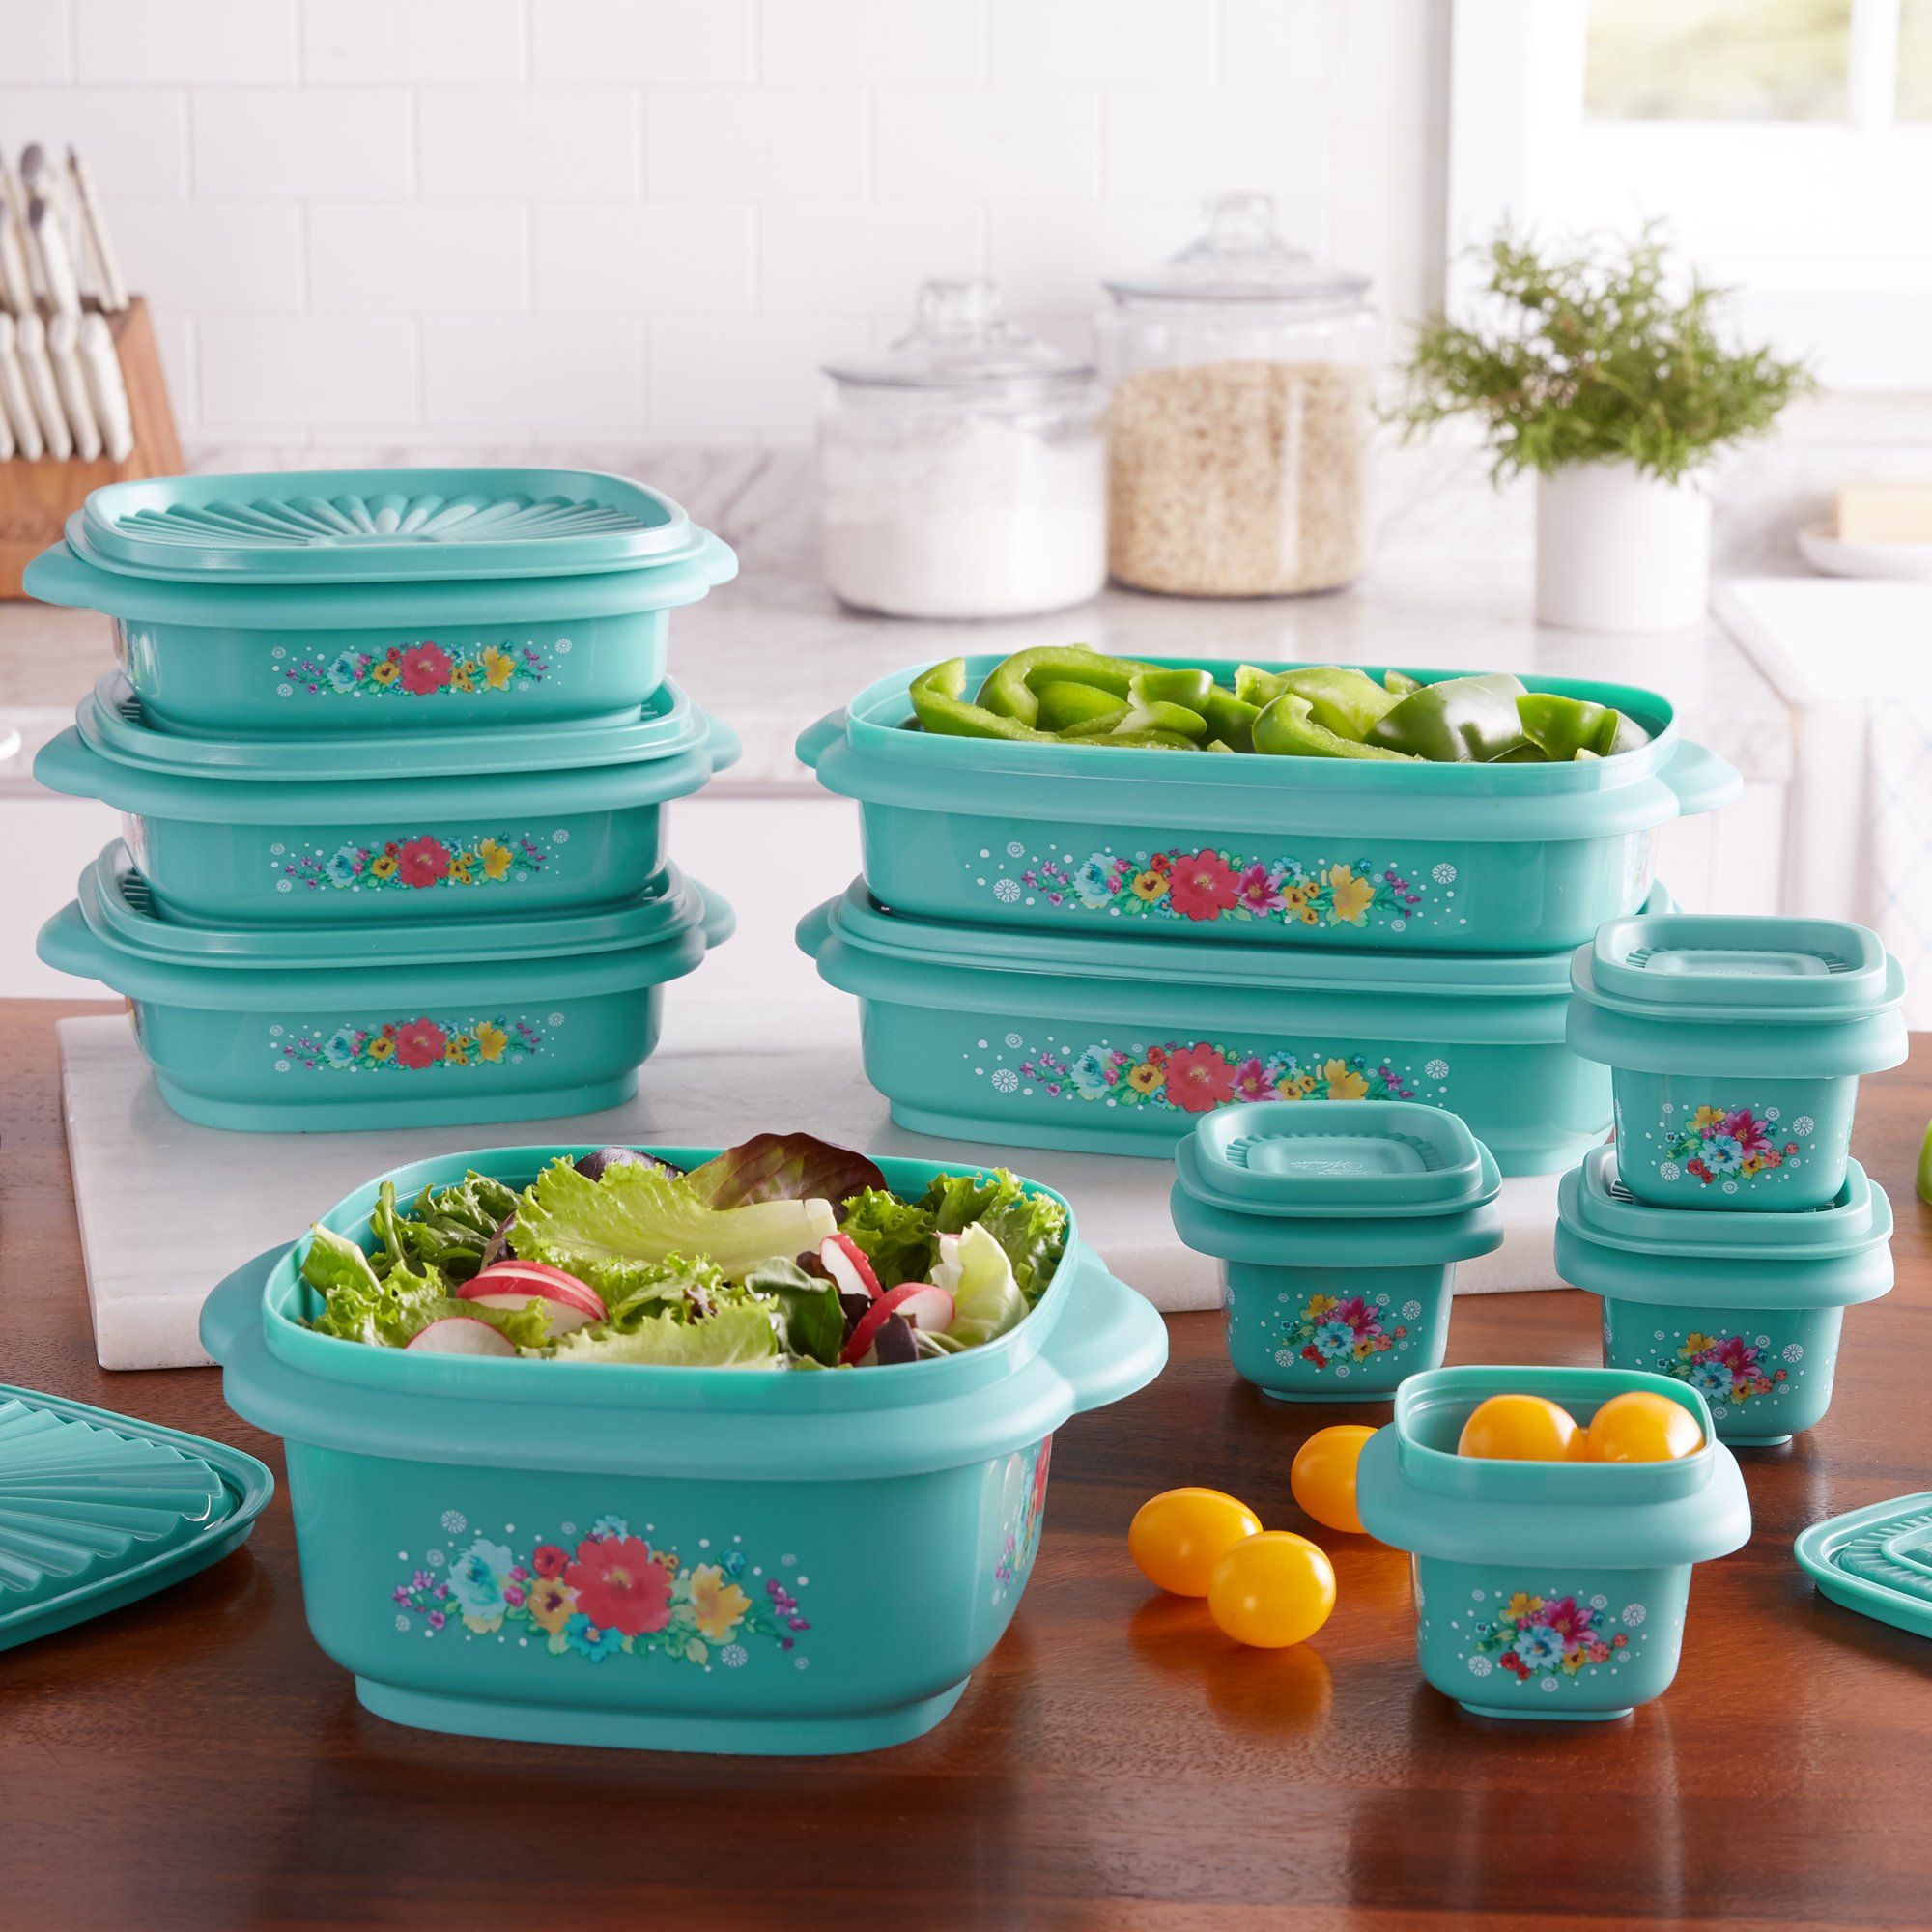 https://hips.hearstapps.com/hmg-prod/images/the-pioneer-woman-food-storage-containers-walmart-1634836052.jpeg